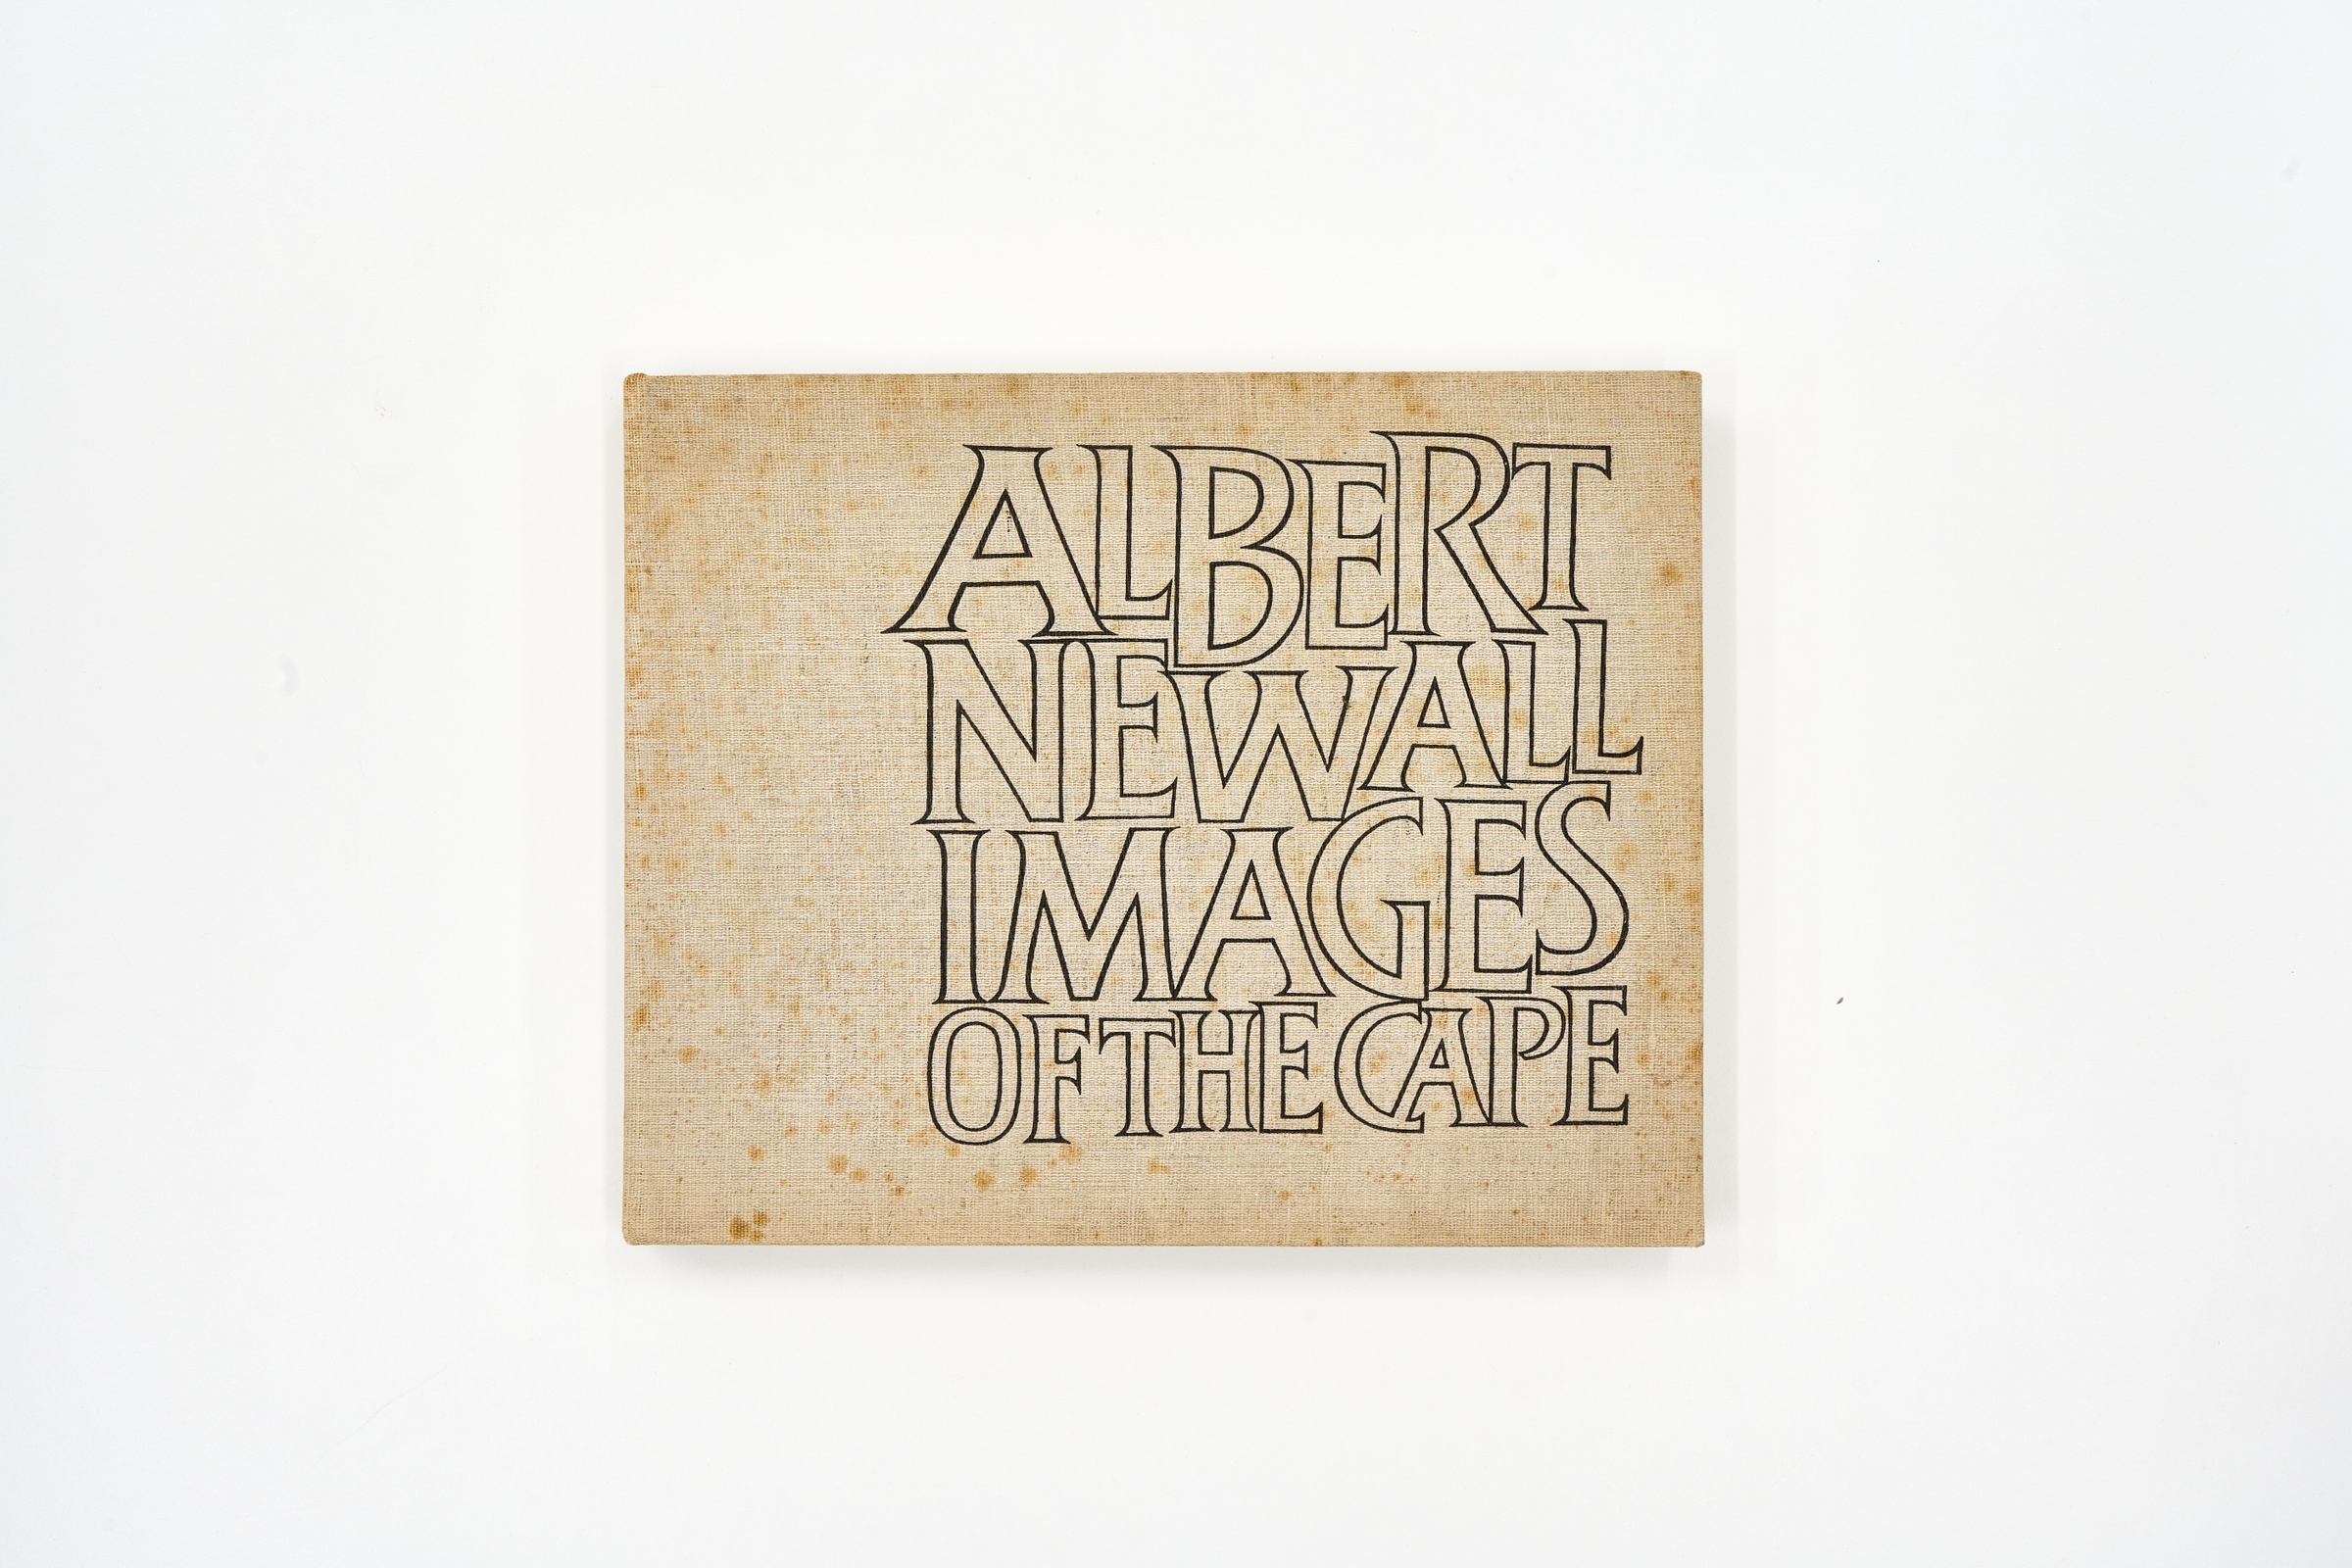 A topdown photograph of the cover of Albert Newall's photo-book 'Images of the Cape' on a white background.
